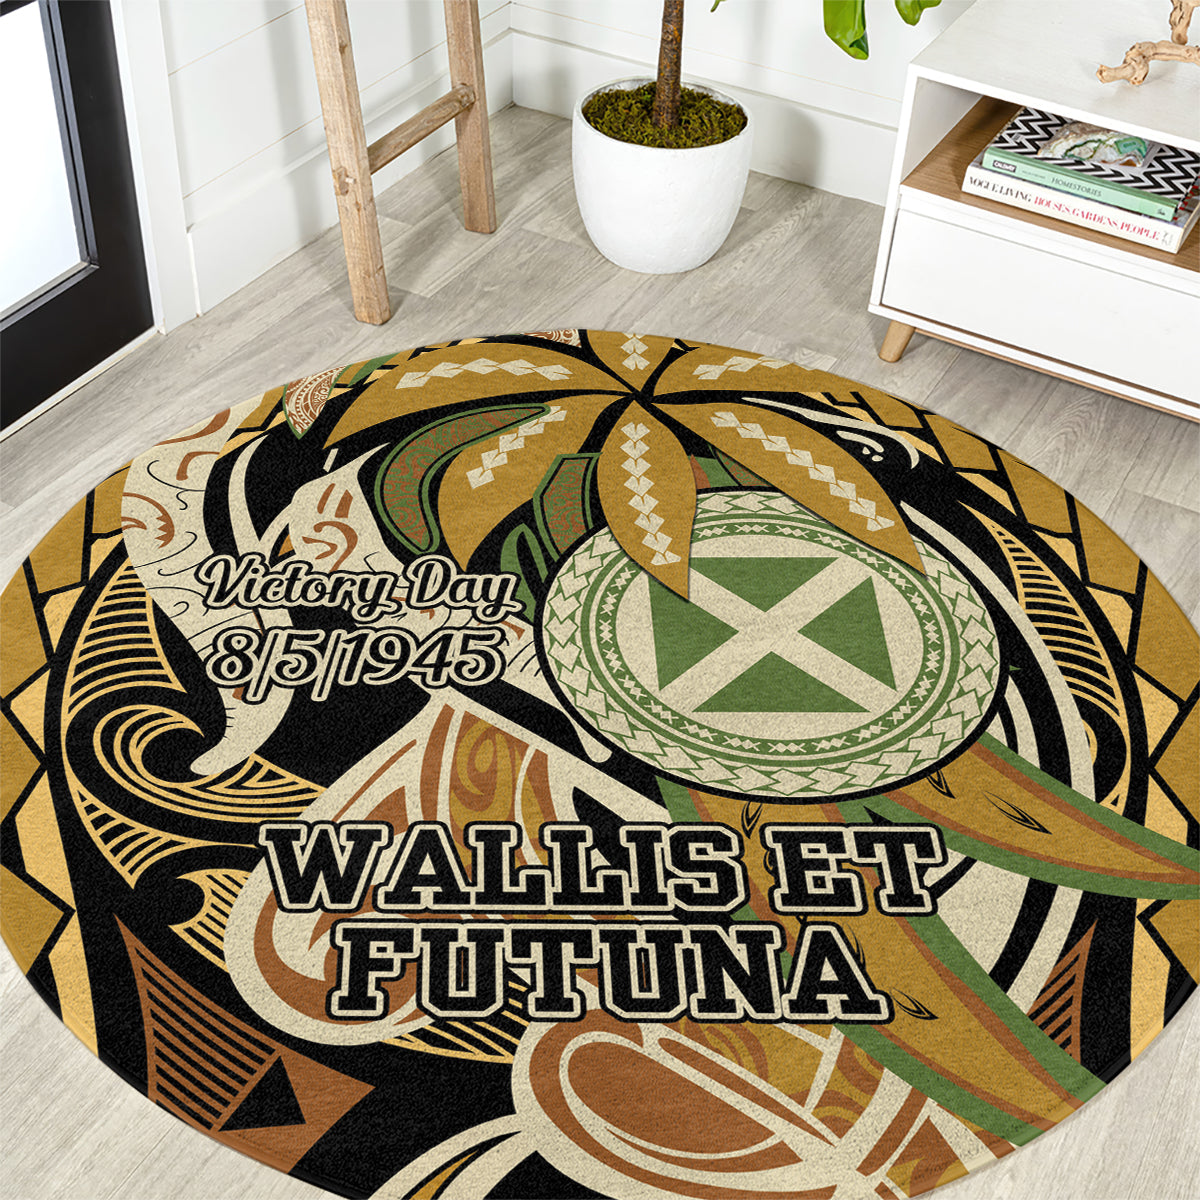 Wallis and Futuna Victory Day Round Carpet Since 1945 with Polynesian Platinum Floral Tribal